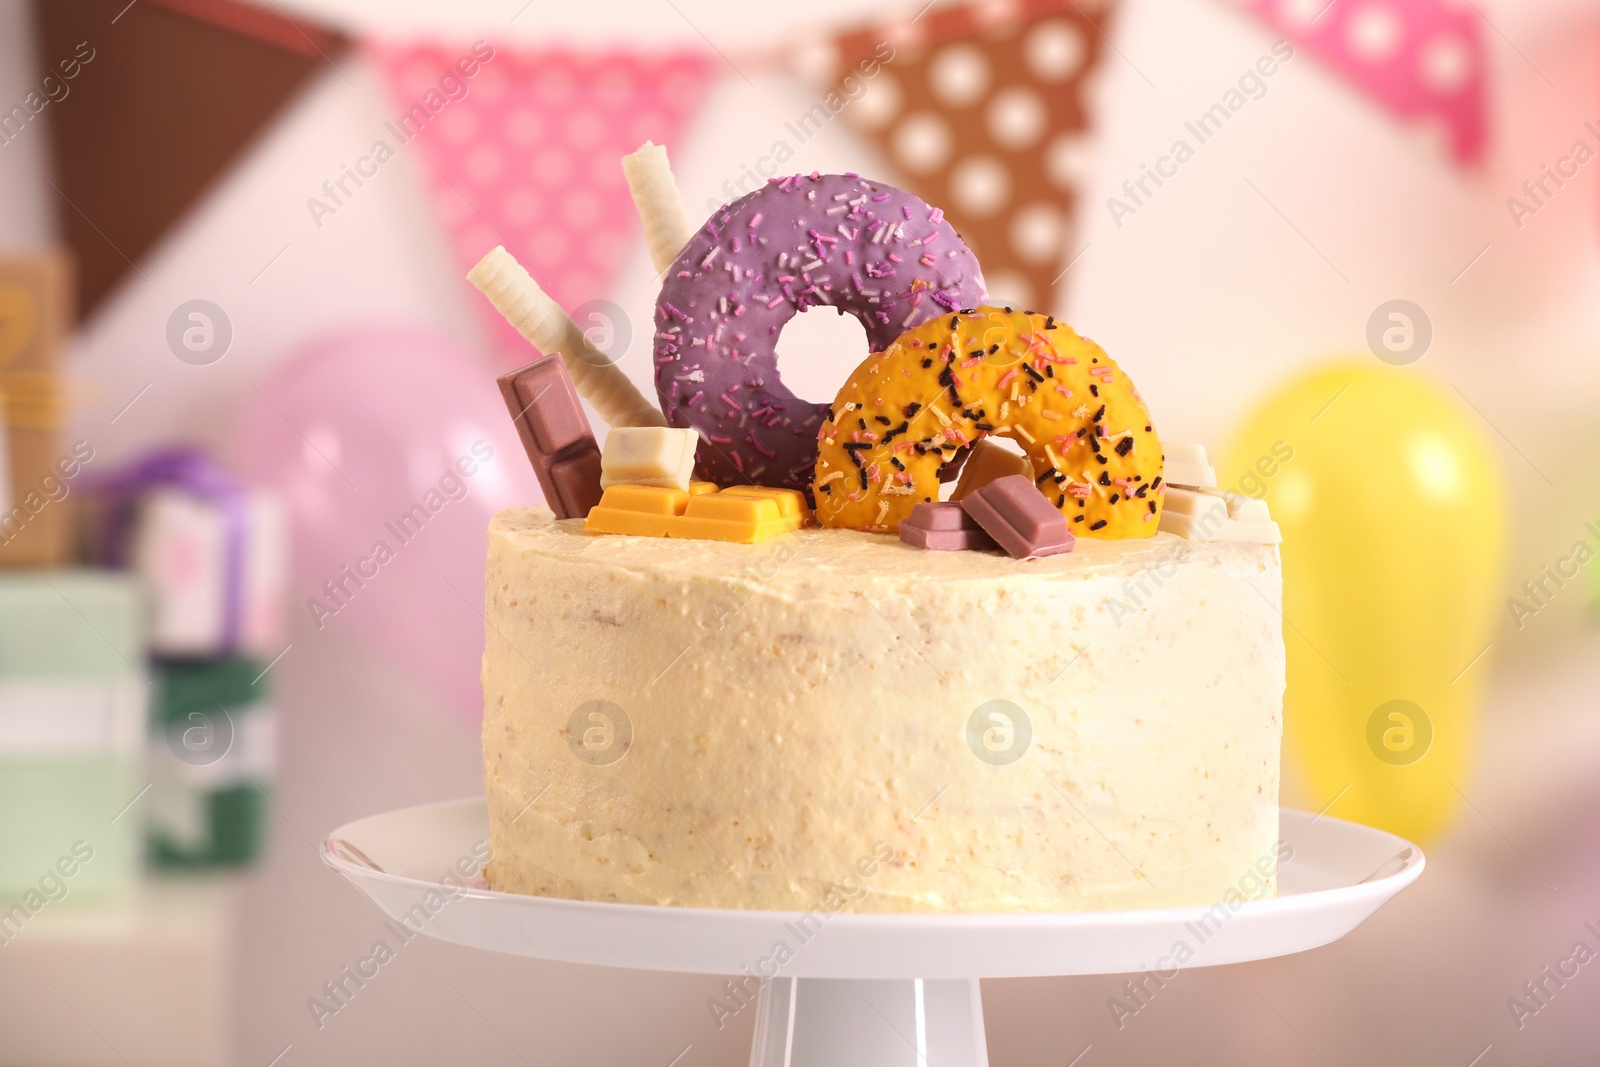 Photo of White stand with delicious cake decorated with sweets against blurred background, closeup